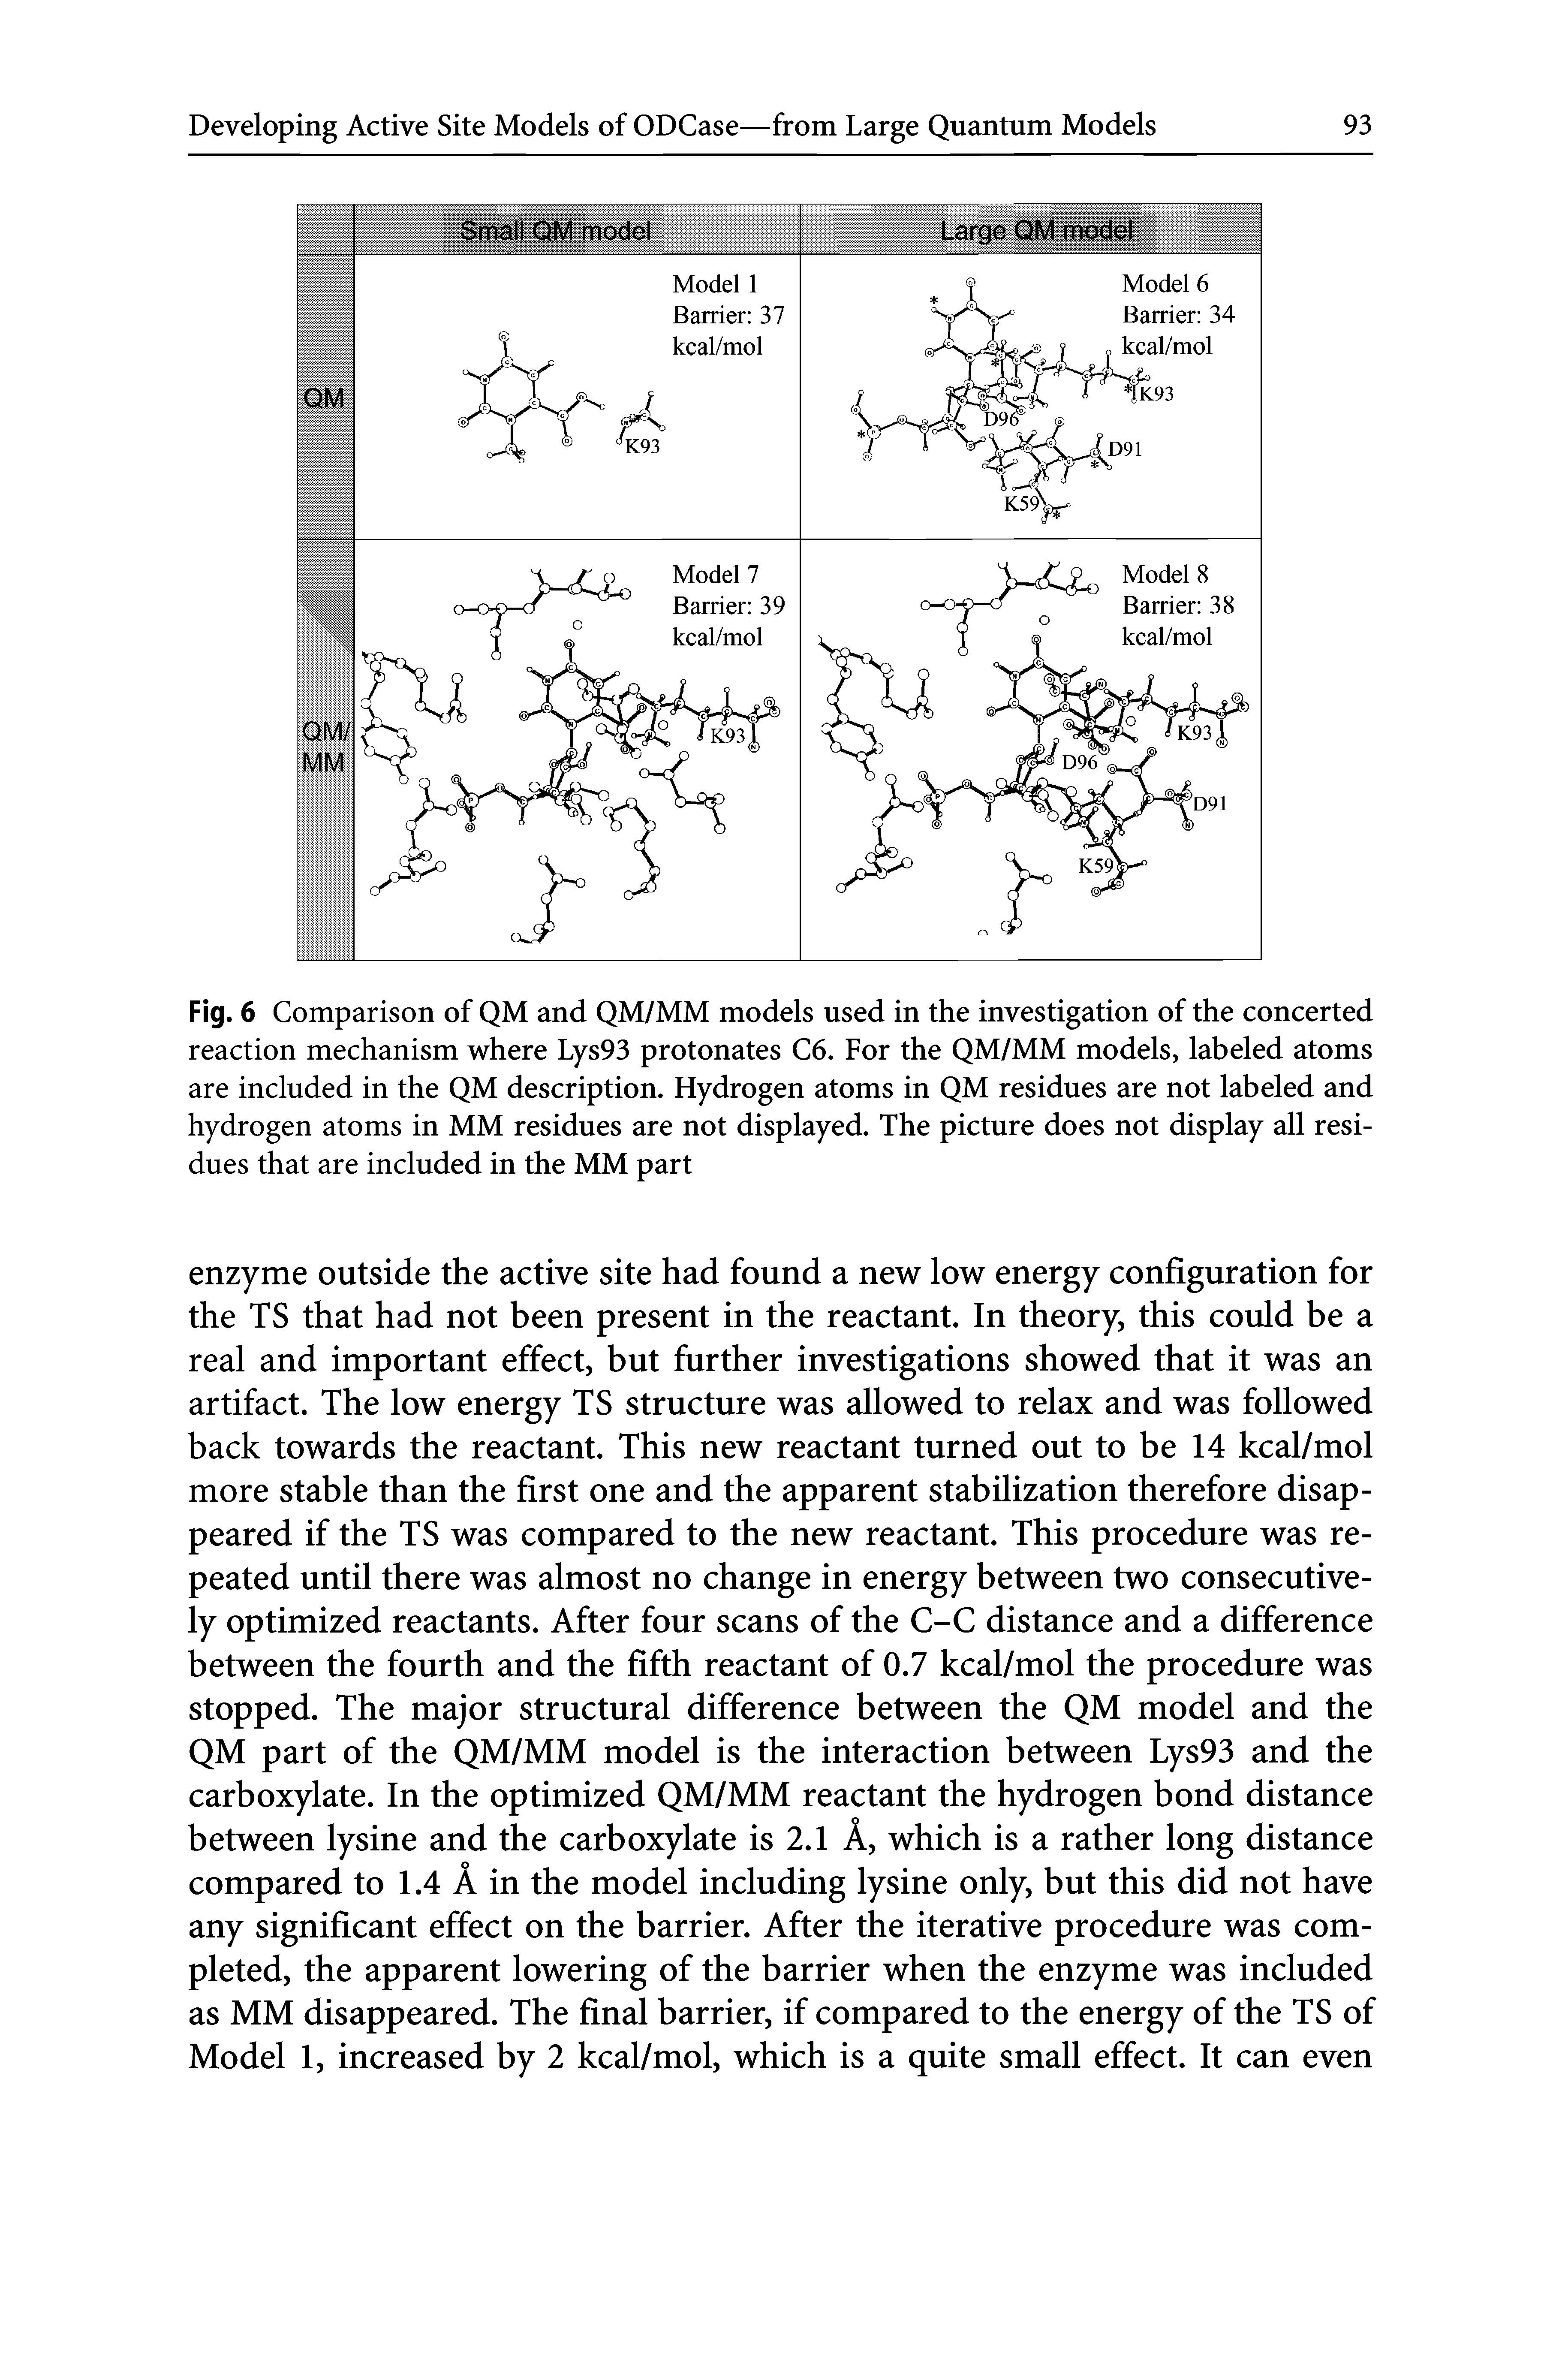 Fig. 6 Comparison of QM and QM/MM models used in the investigation of the concerted reaction mechanism where Lys93 protonates C6. For the QM/MM models, labeled atoms are included in the QM description. Hydrogen atoms in QM residues are not labeled and hydrogen atoms in MM residues are not displayed. The picture does not display all residues that are included in the MM part...